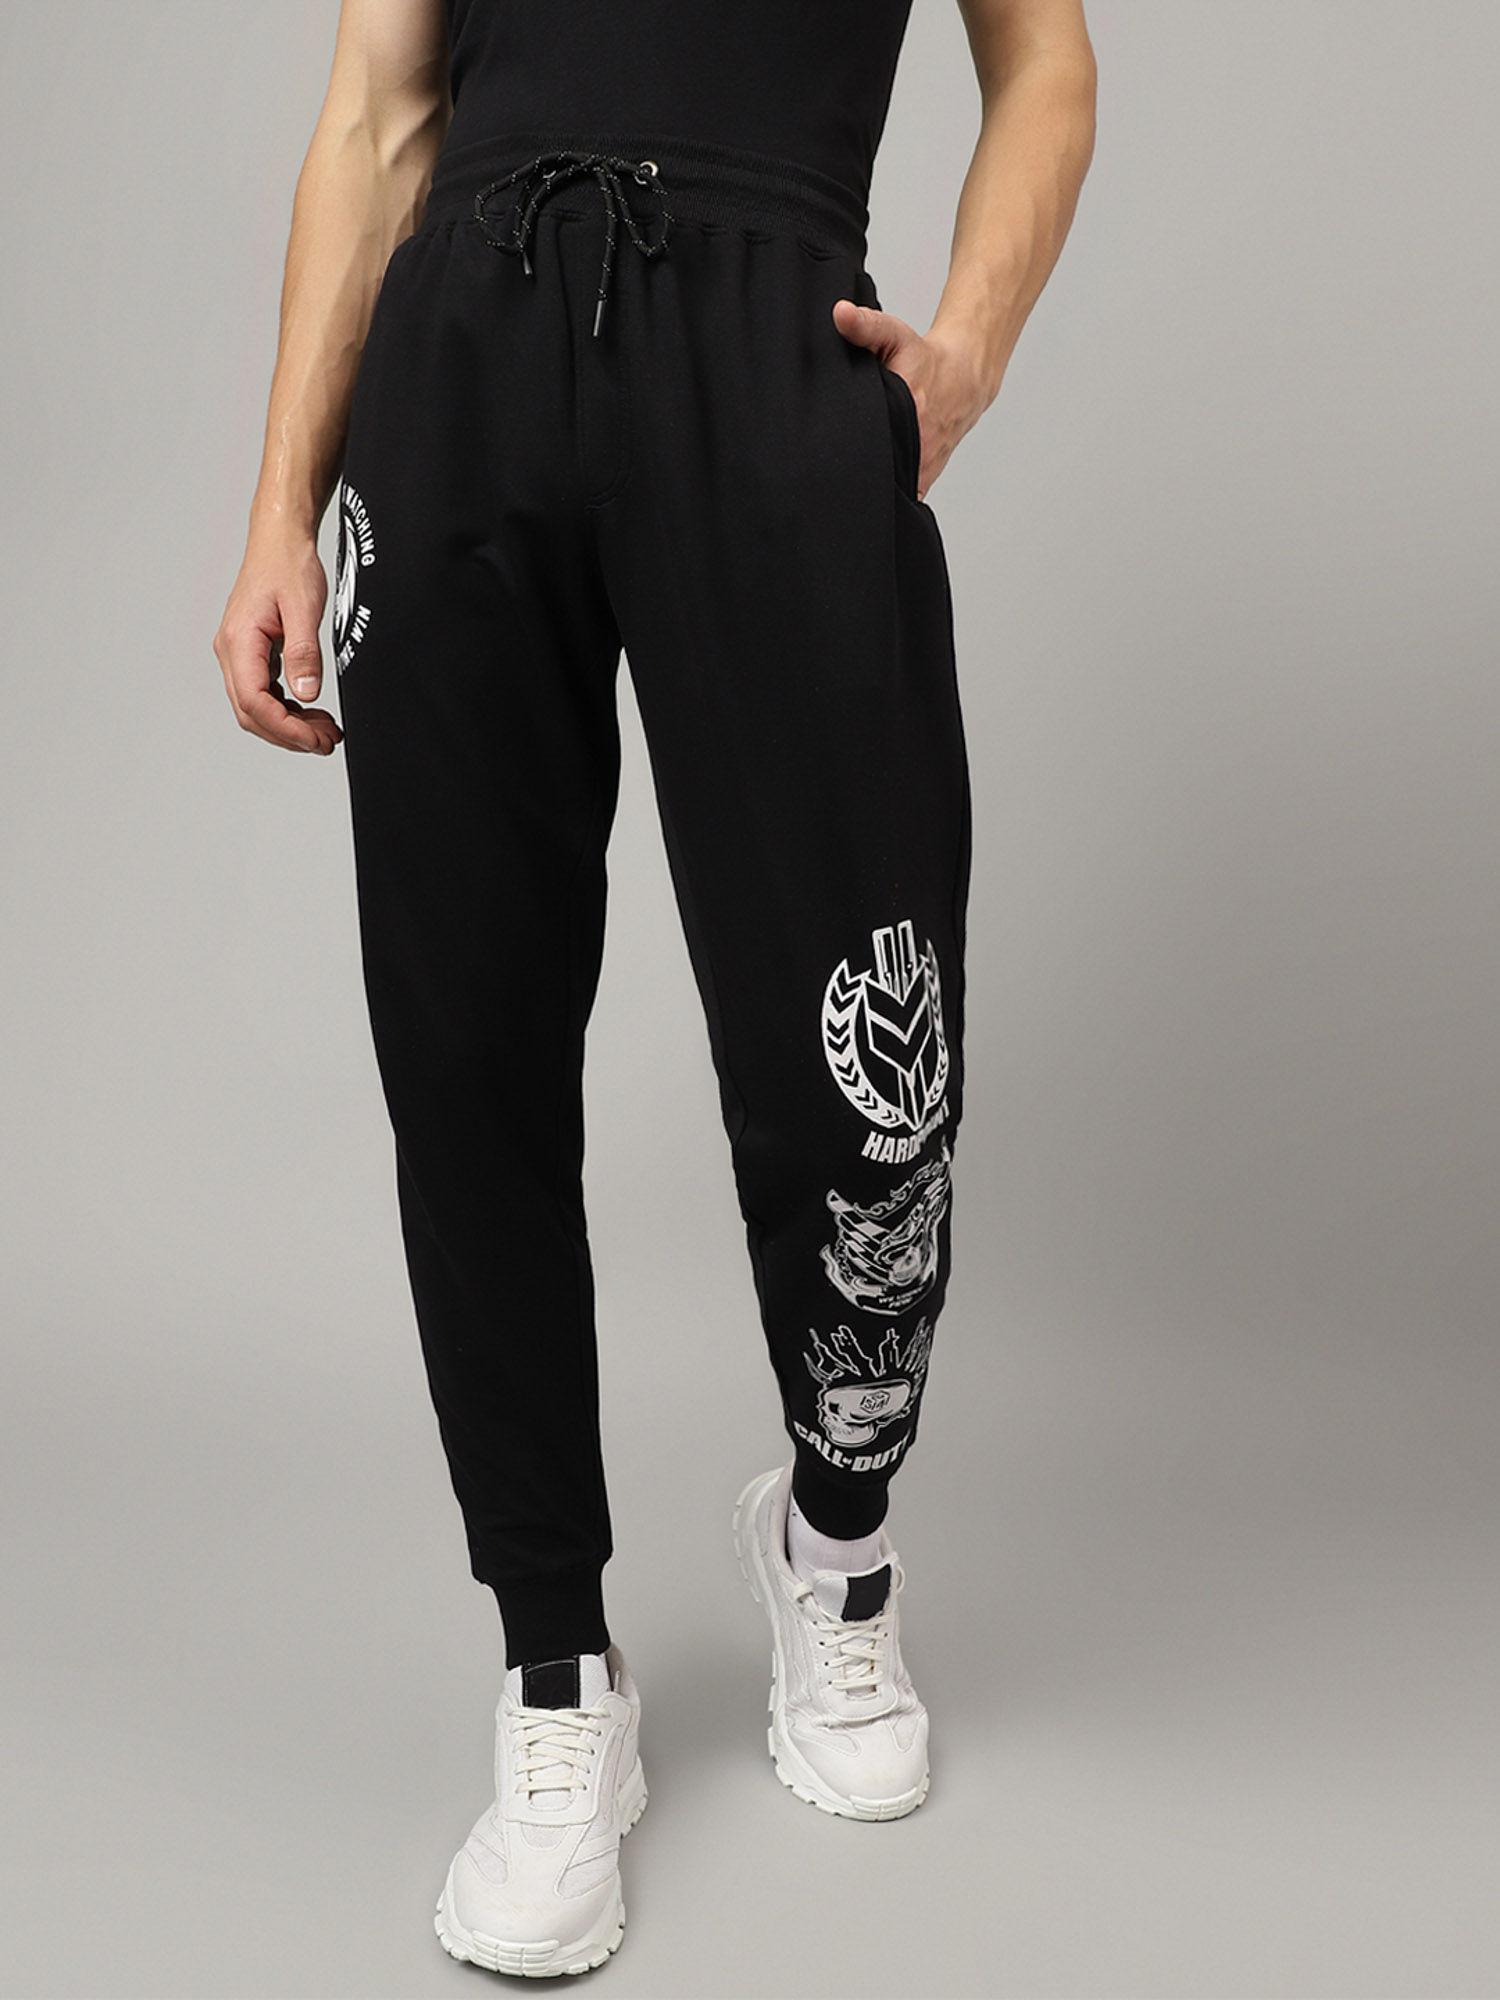 call of duty printed jogger for men